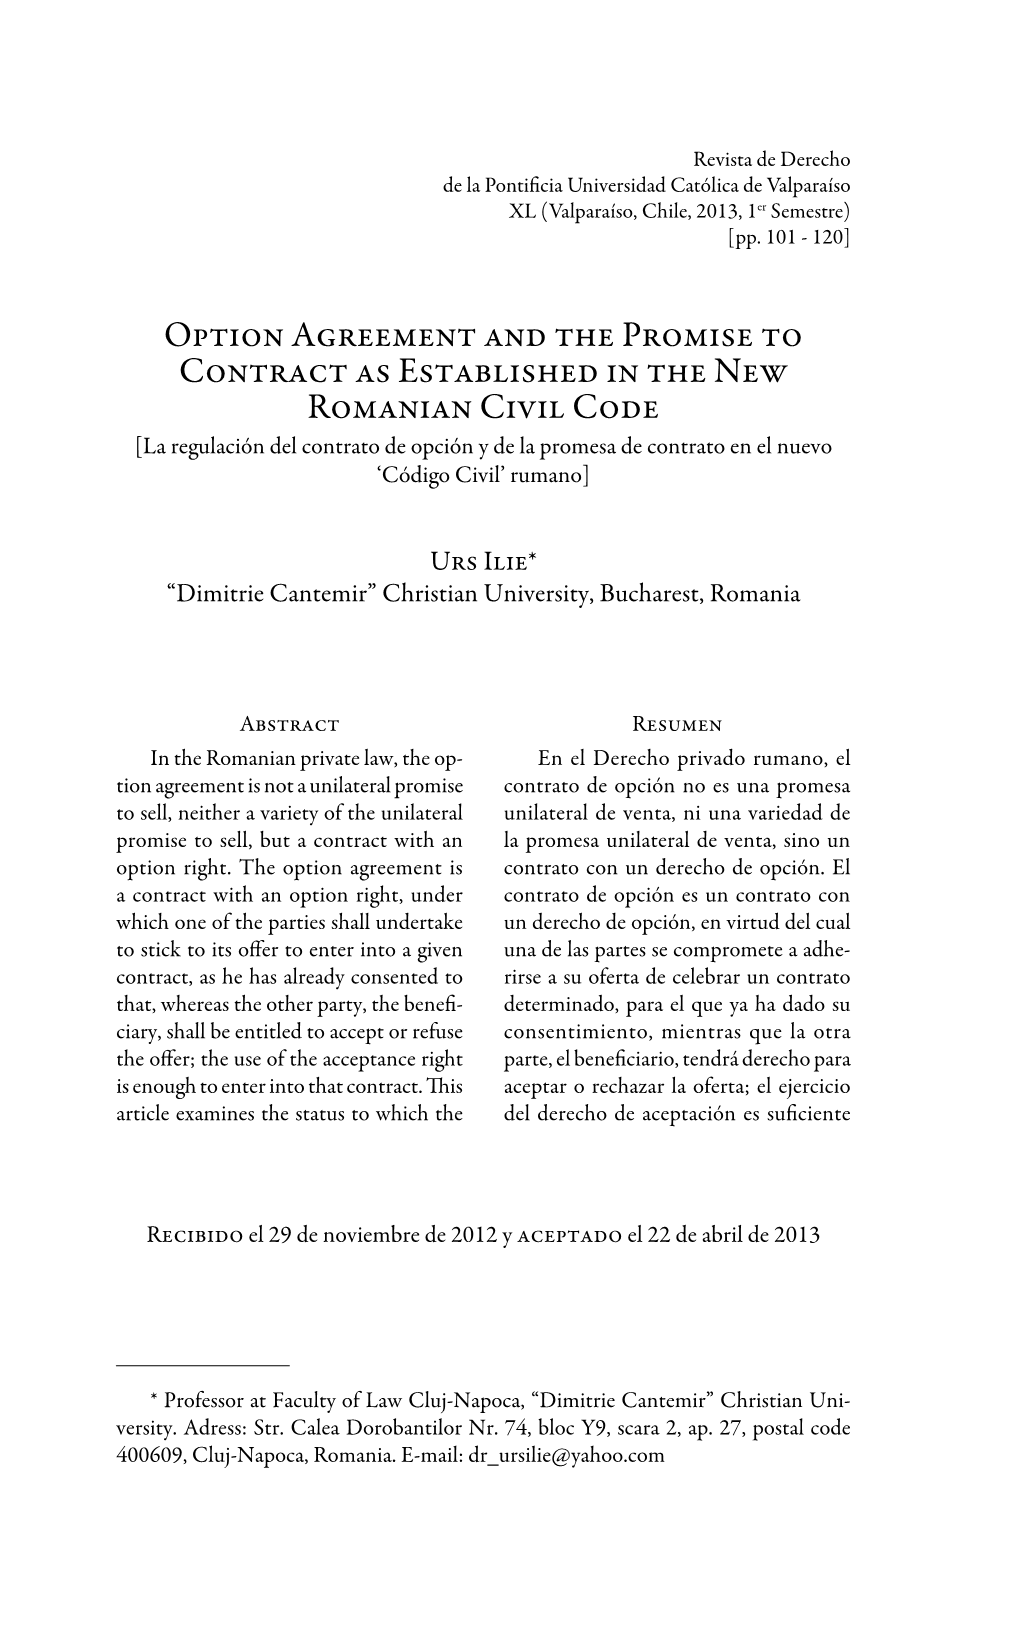 Option Agreement and the Promise to Contract As Established in the New